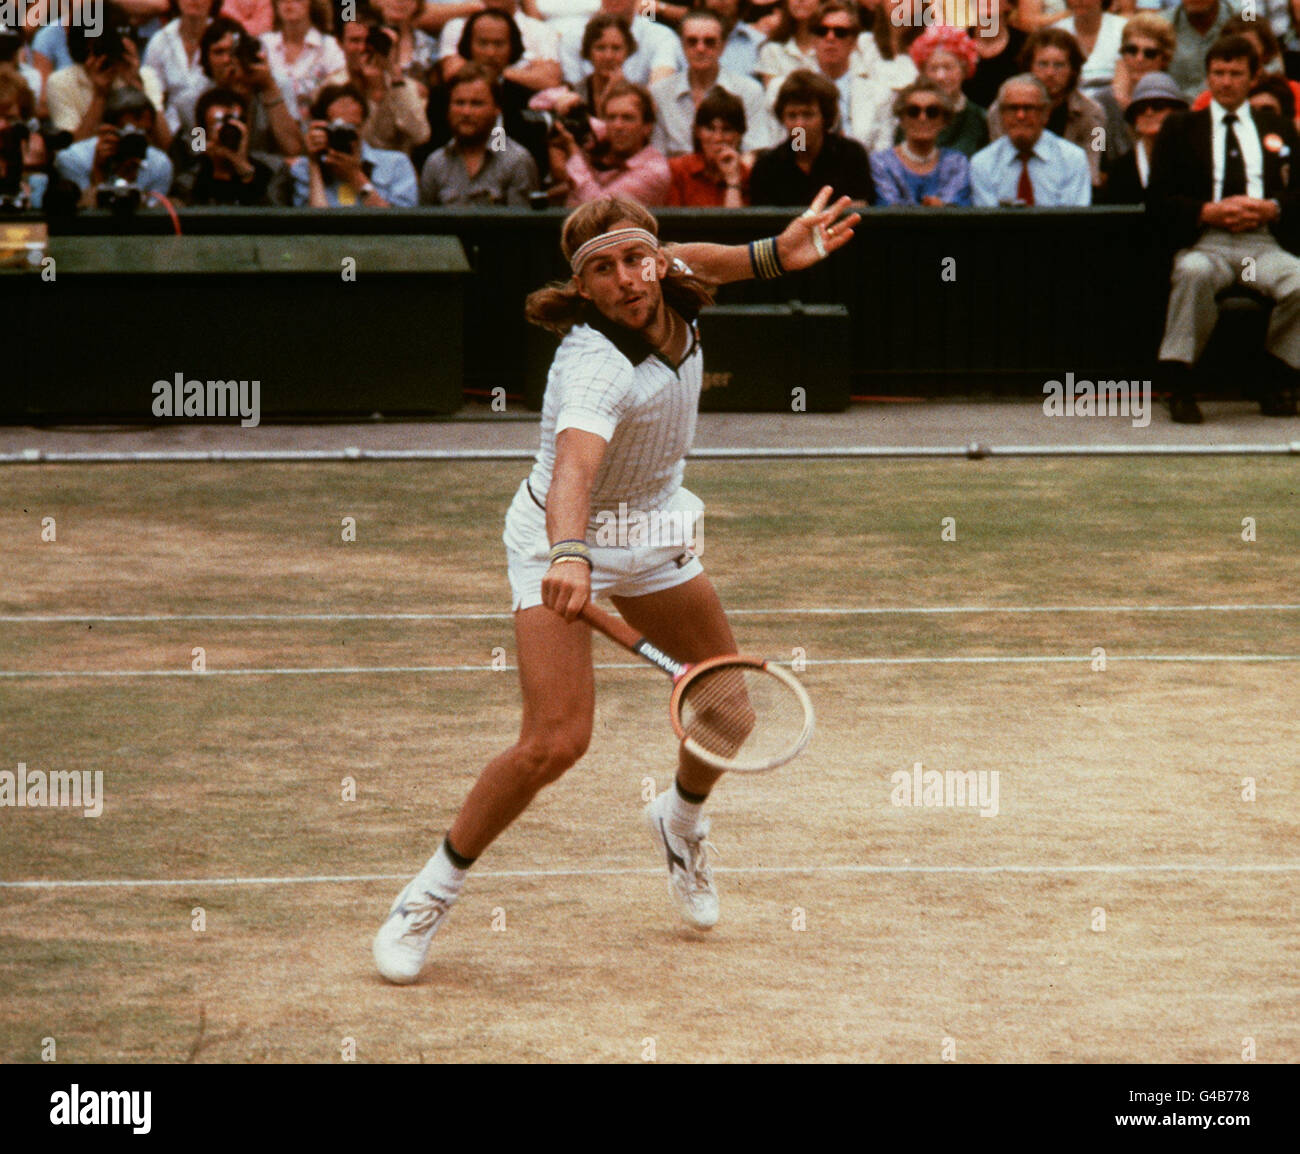 PA NEWS PHOTO 7/7/79 SWEDEN'S BJORN BORG IN ACTION ON CENTRE COURT DURING THE WIMBLEDON TENNIS MENS SINGLES FINAL IN LONDON AGAINST ROSCOE TANNER OF THE UNITED STATES. BJORN BORG WON THE MATCH TO BECOME CHAMPION FOR A RECORD FOURTH SUCCESSIVE YEAR Stock Photo